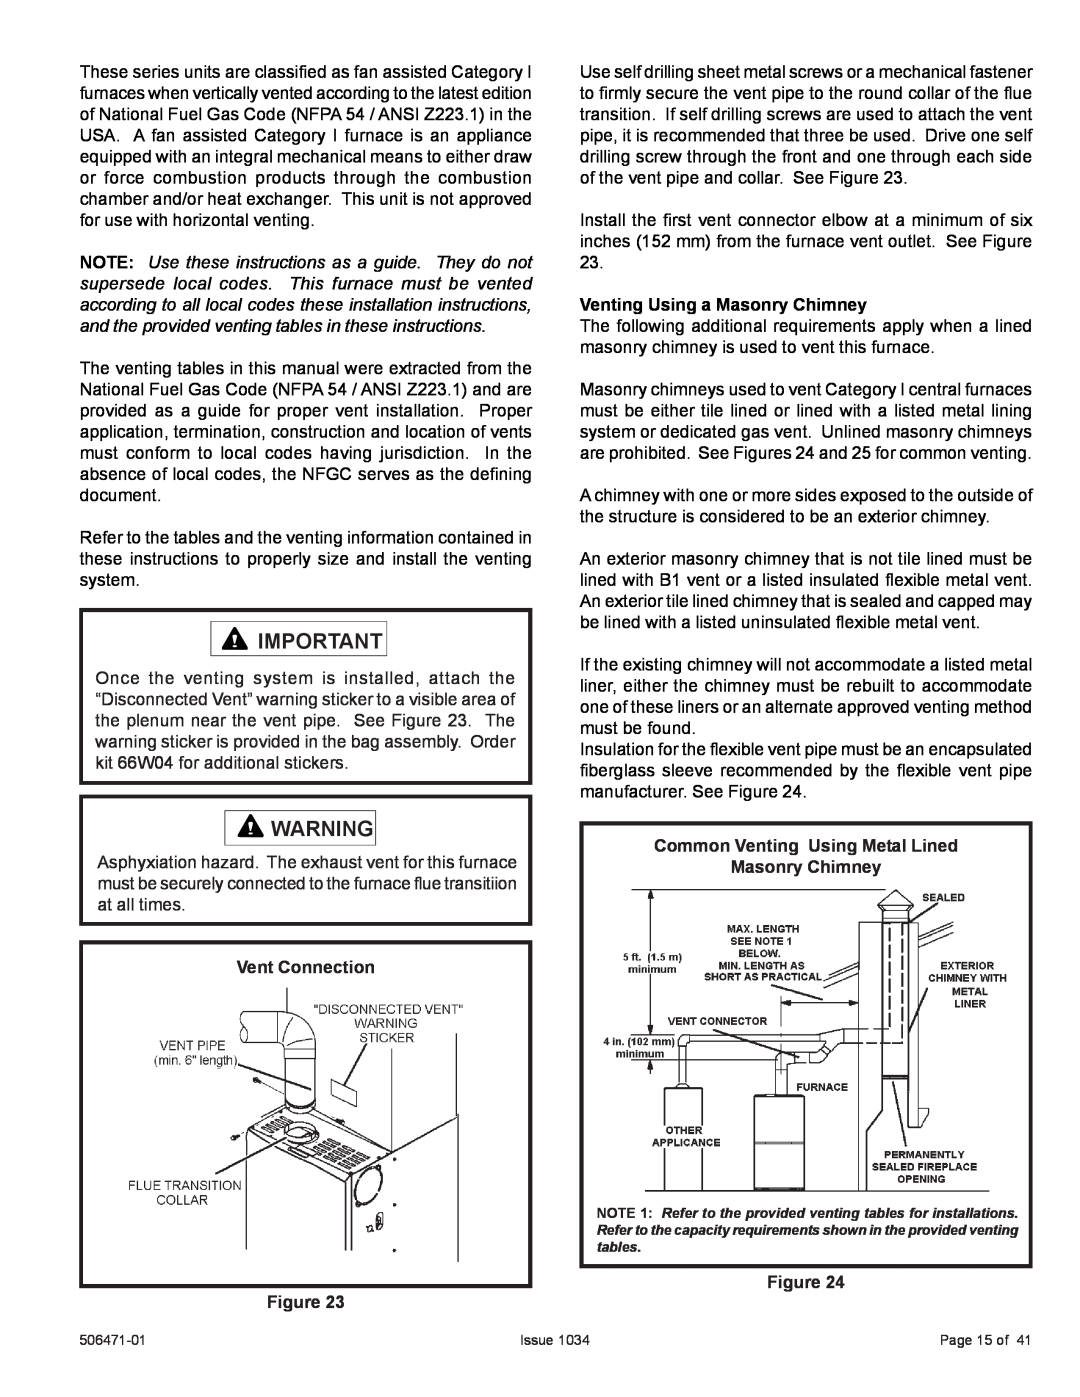 Allied Air Enterprises 80G1UH2V, A80UH2V Vent Connection Figure, Venting Using a Masonry Chimney, Issue, Page 15 of 